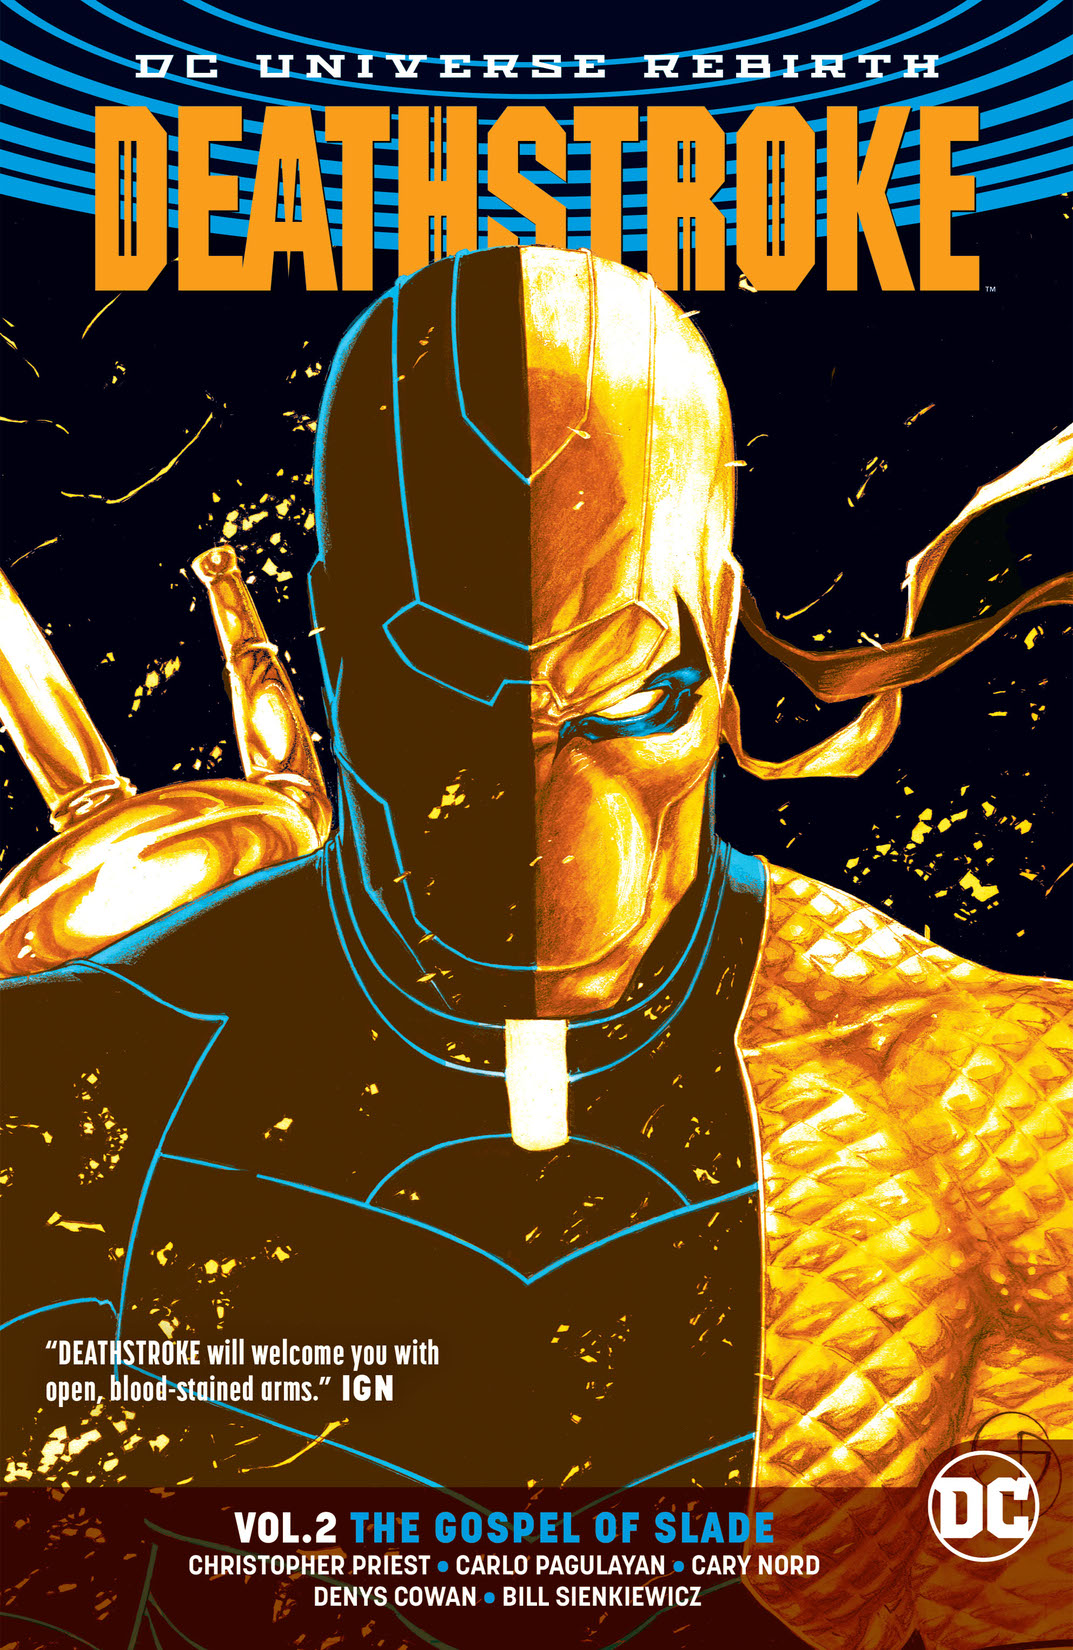 Deathstroke Vol. 2: The Gospel of Slade preview images